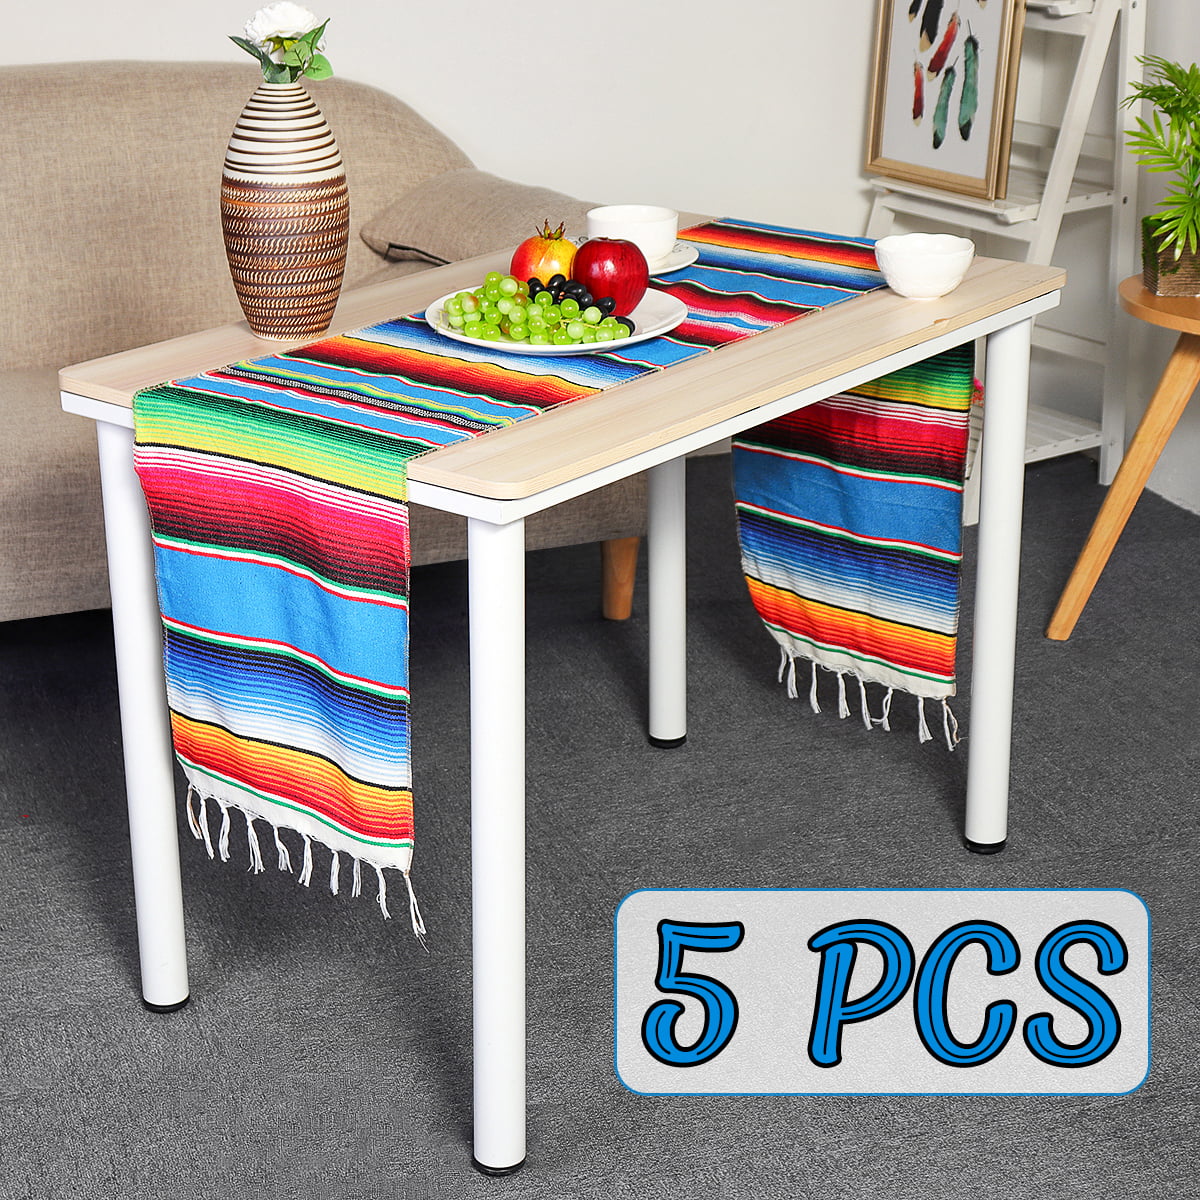 2 Pack 14 by 84 Inch Mexican Table Runner 14 x 84 inch Mexican Party Wedding Decorations Fringe Cotton Serape Blanket Table Runner （Green